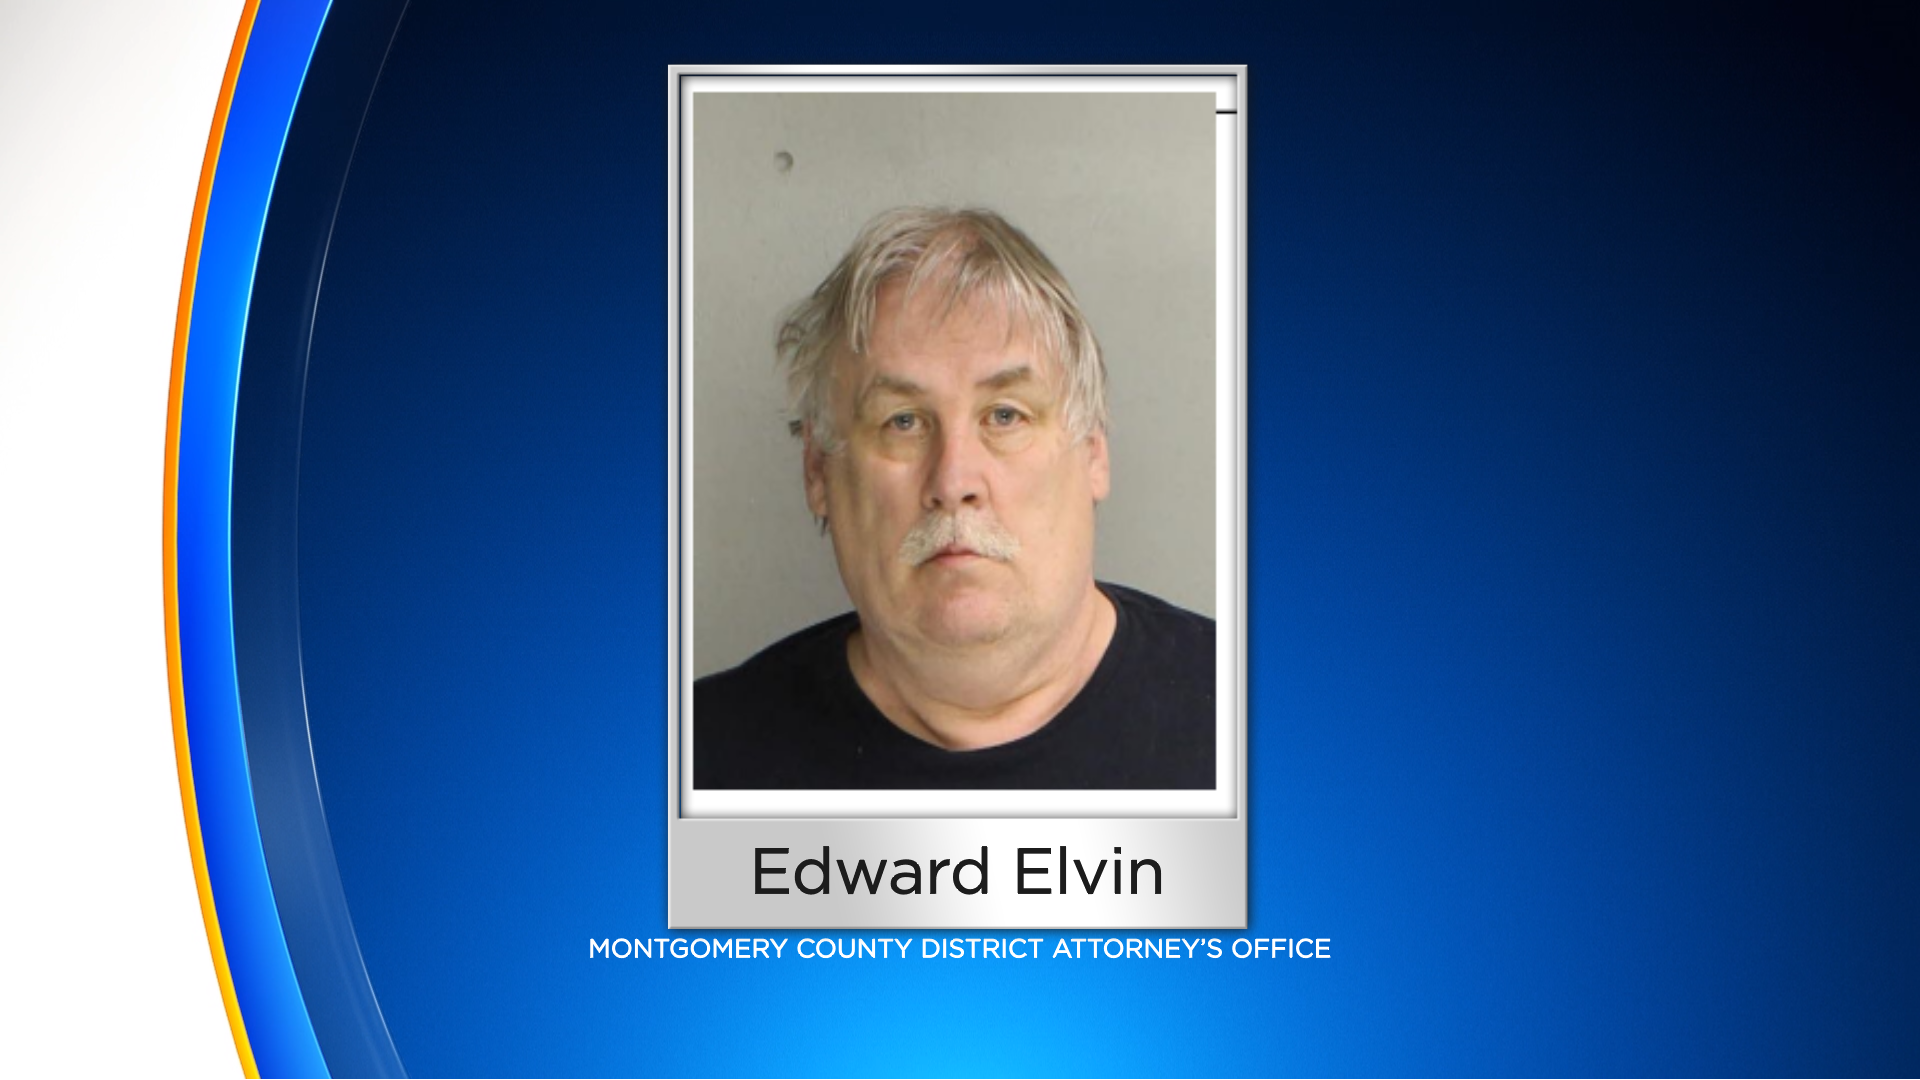 Edward Elvin Charged With More Than 250 Counts Of Possessing Child Pornography: Officials